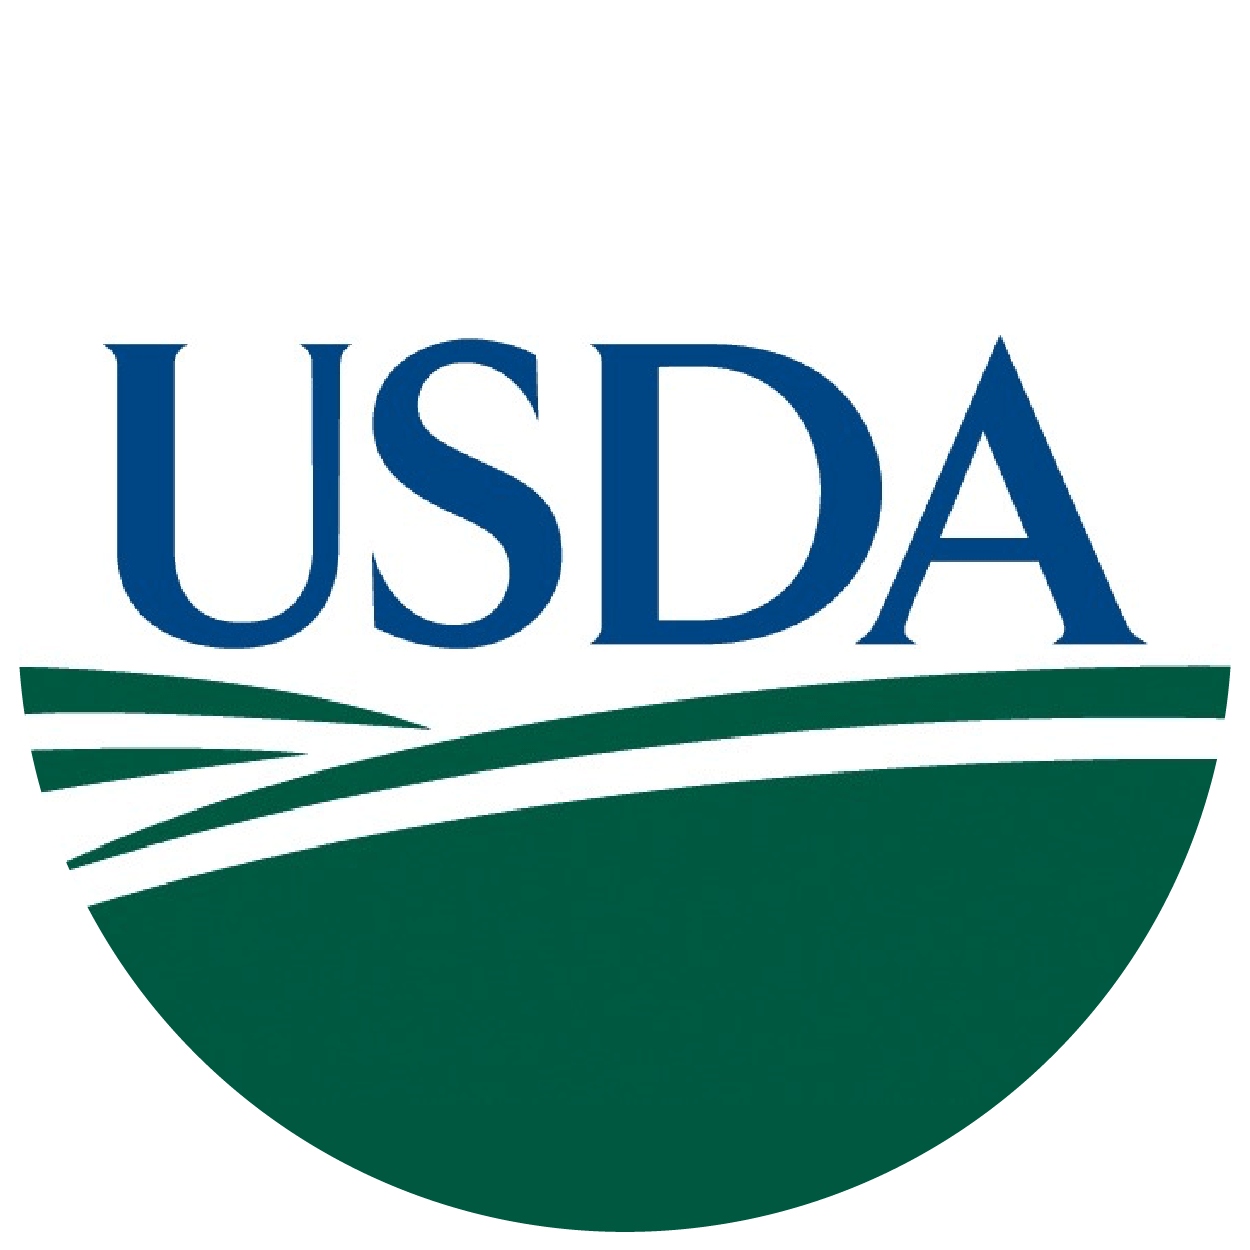 United States Department of Agriculture Seal